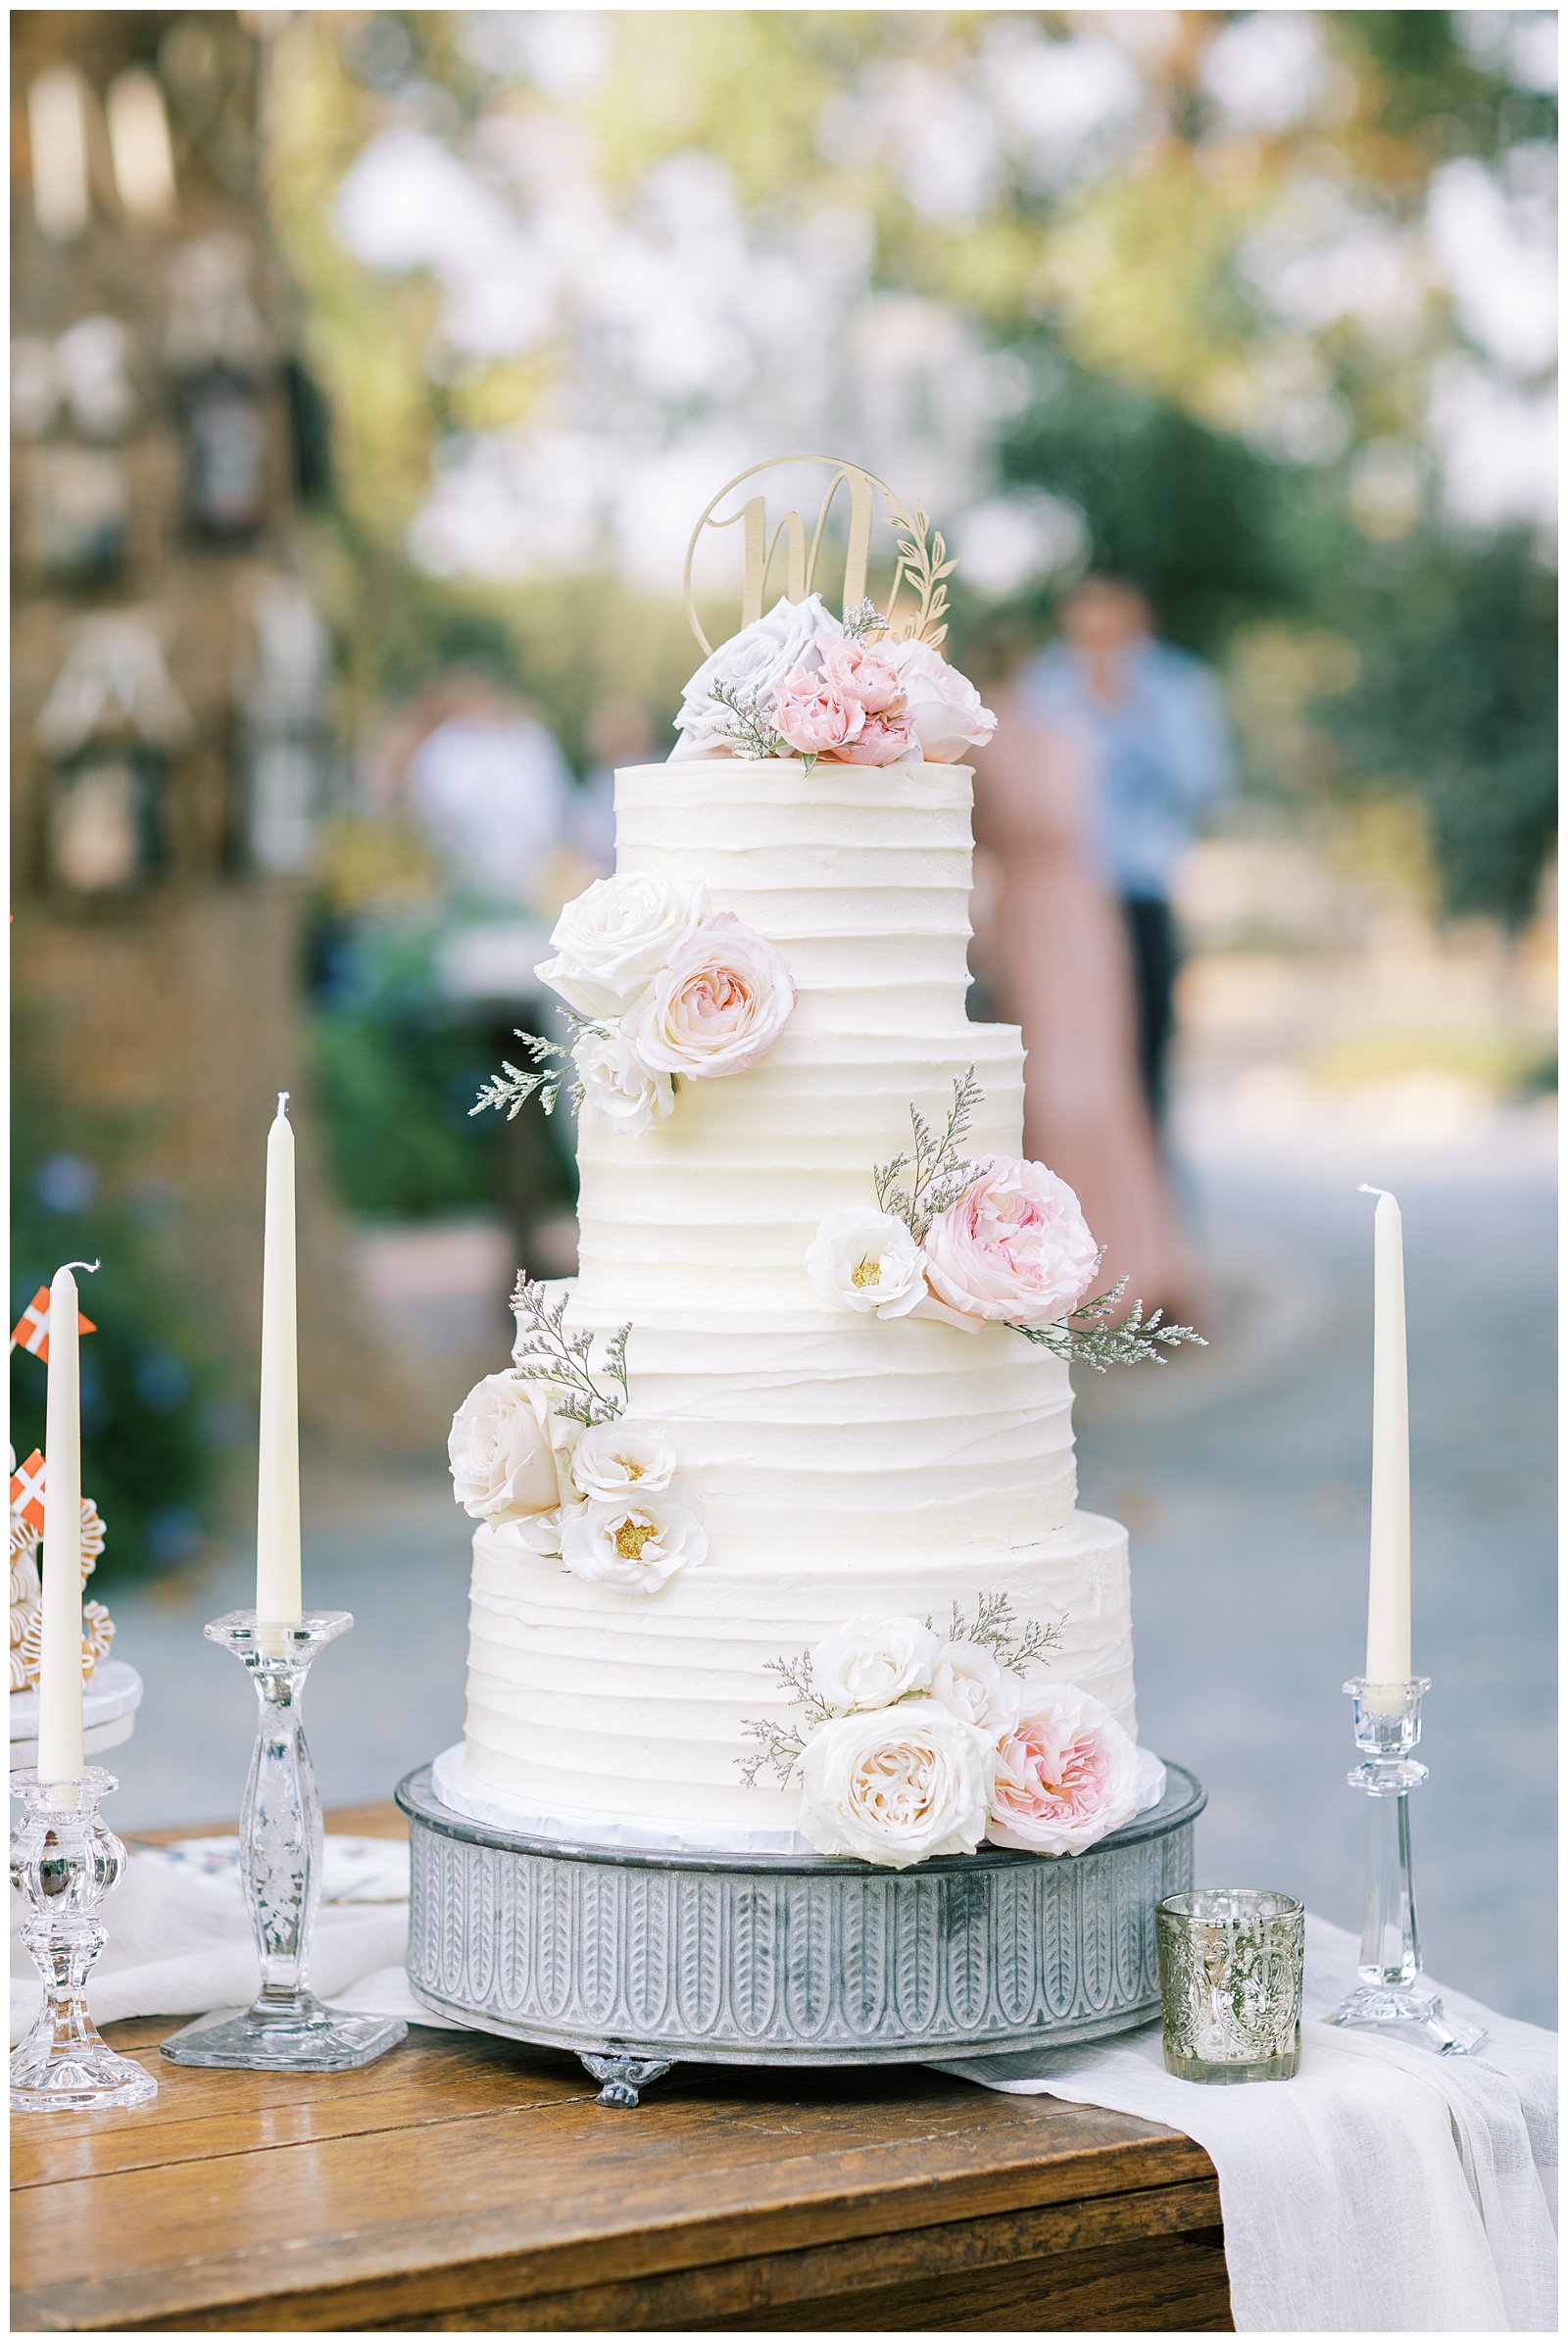 four tier wedding cake with white frosting and blush flowers with gold cake topper